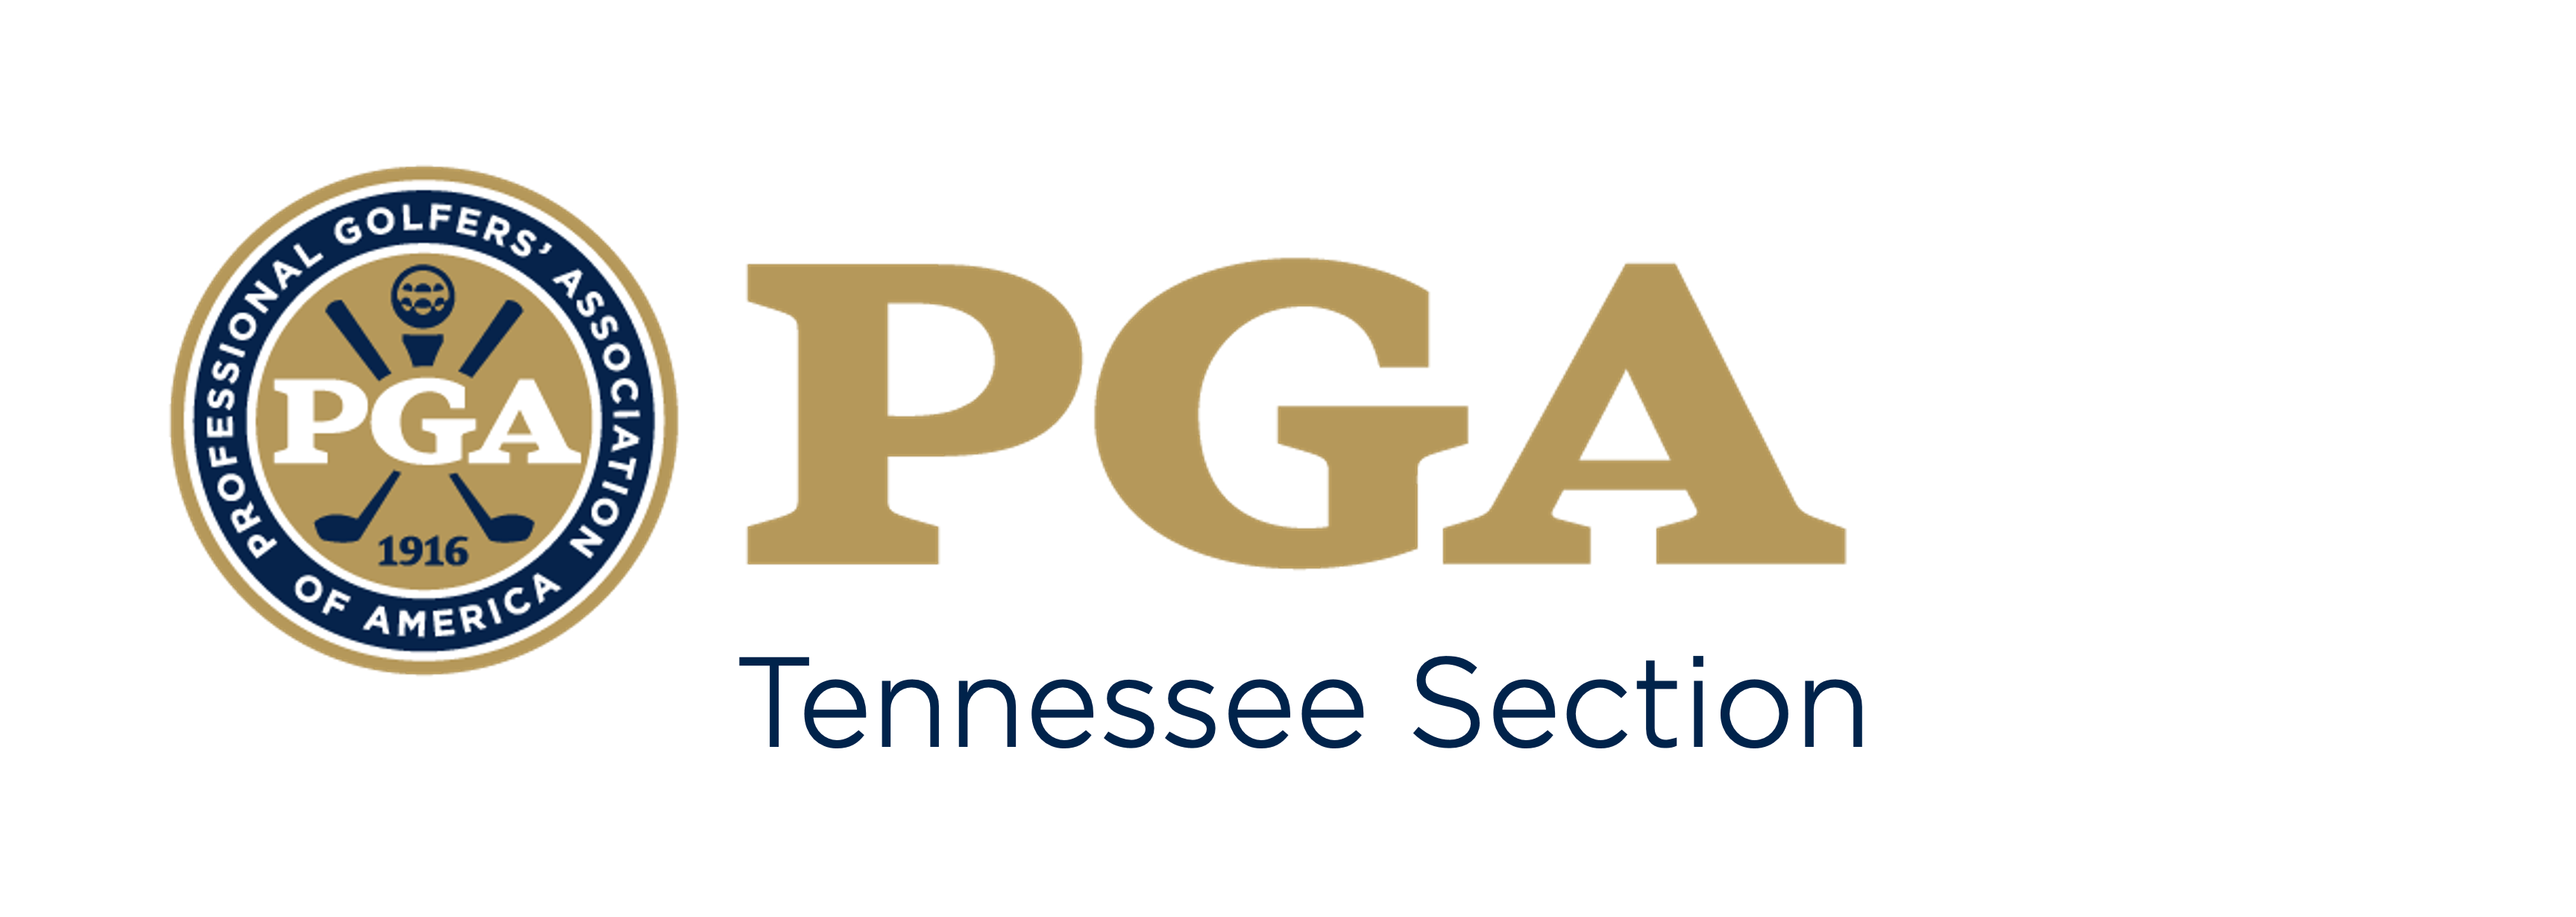 tennessee pga section